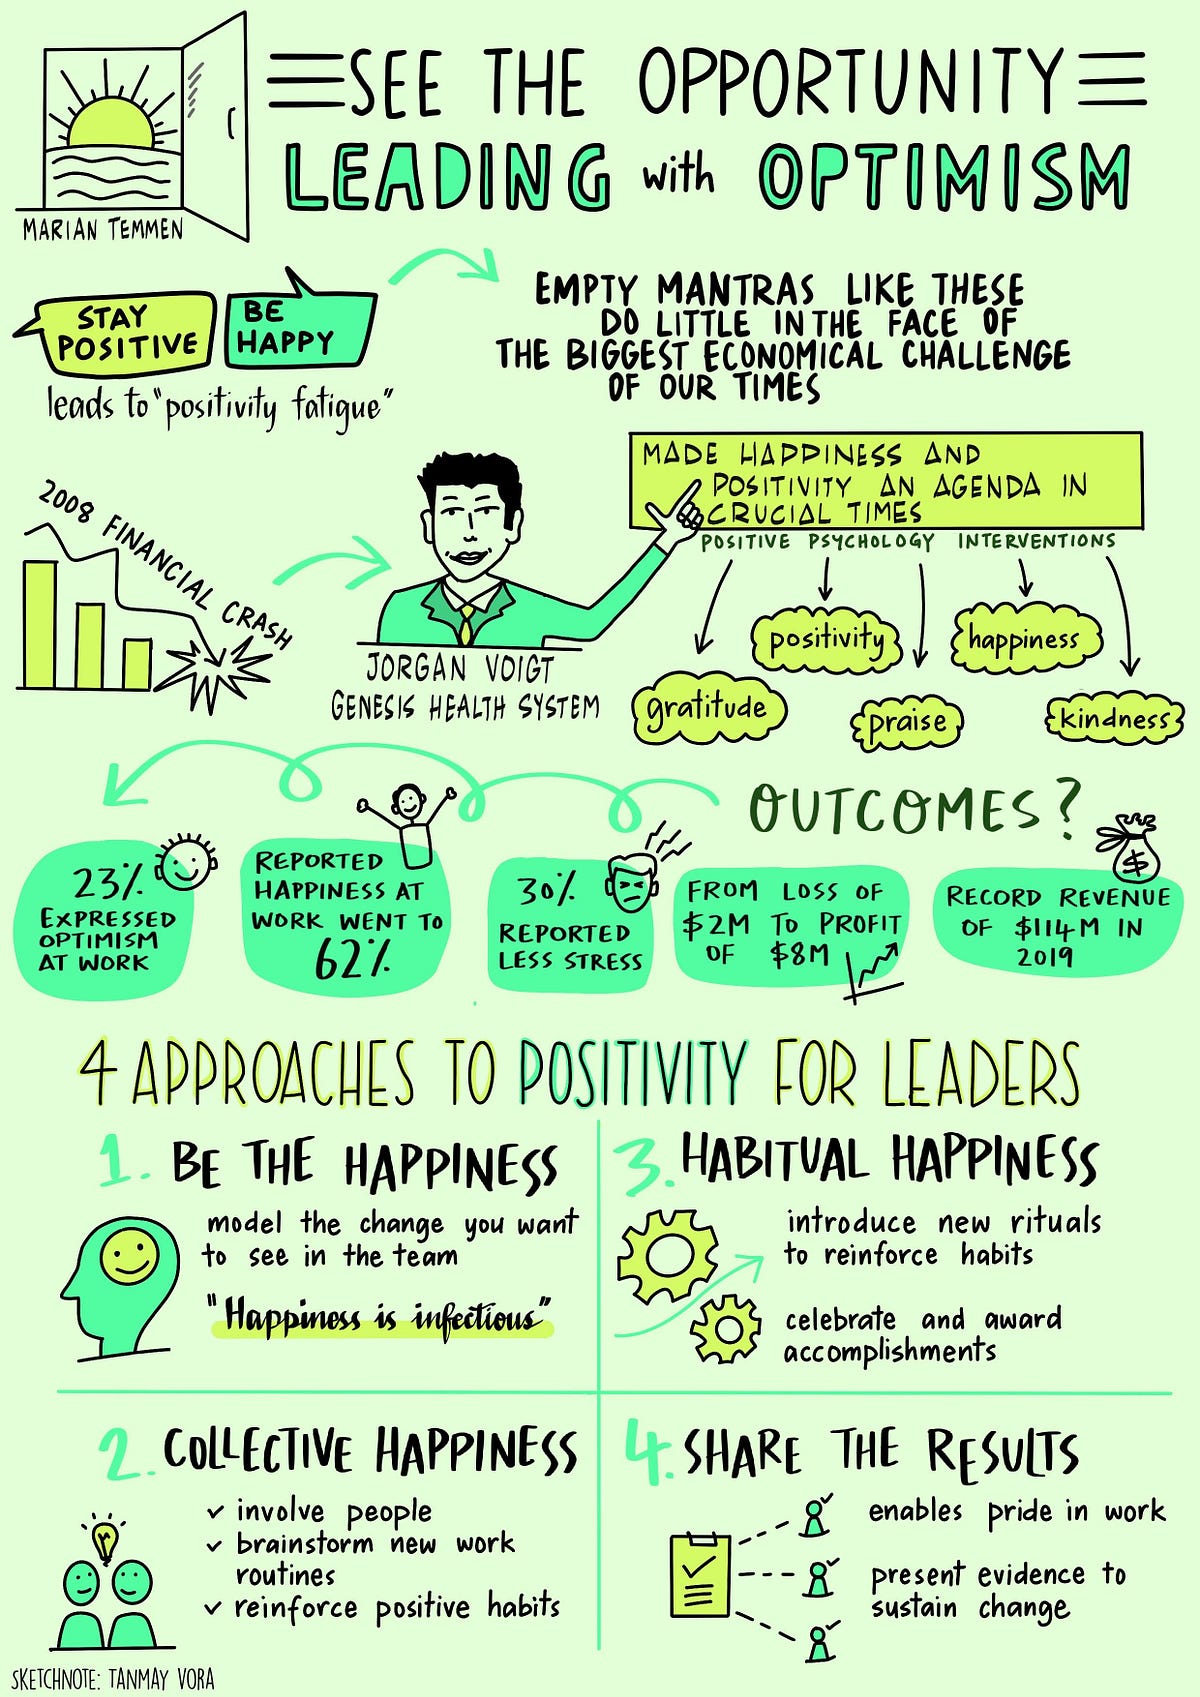 Embracing Optimism: Leading with Vision and Resilience